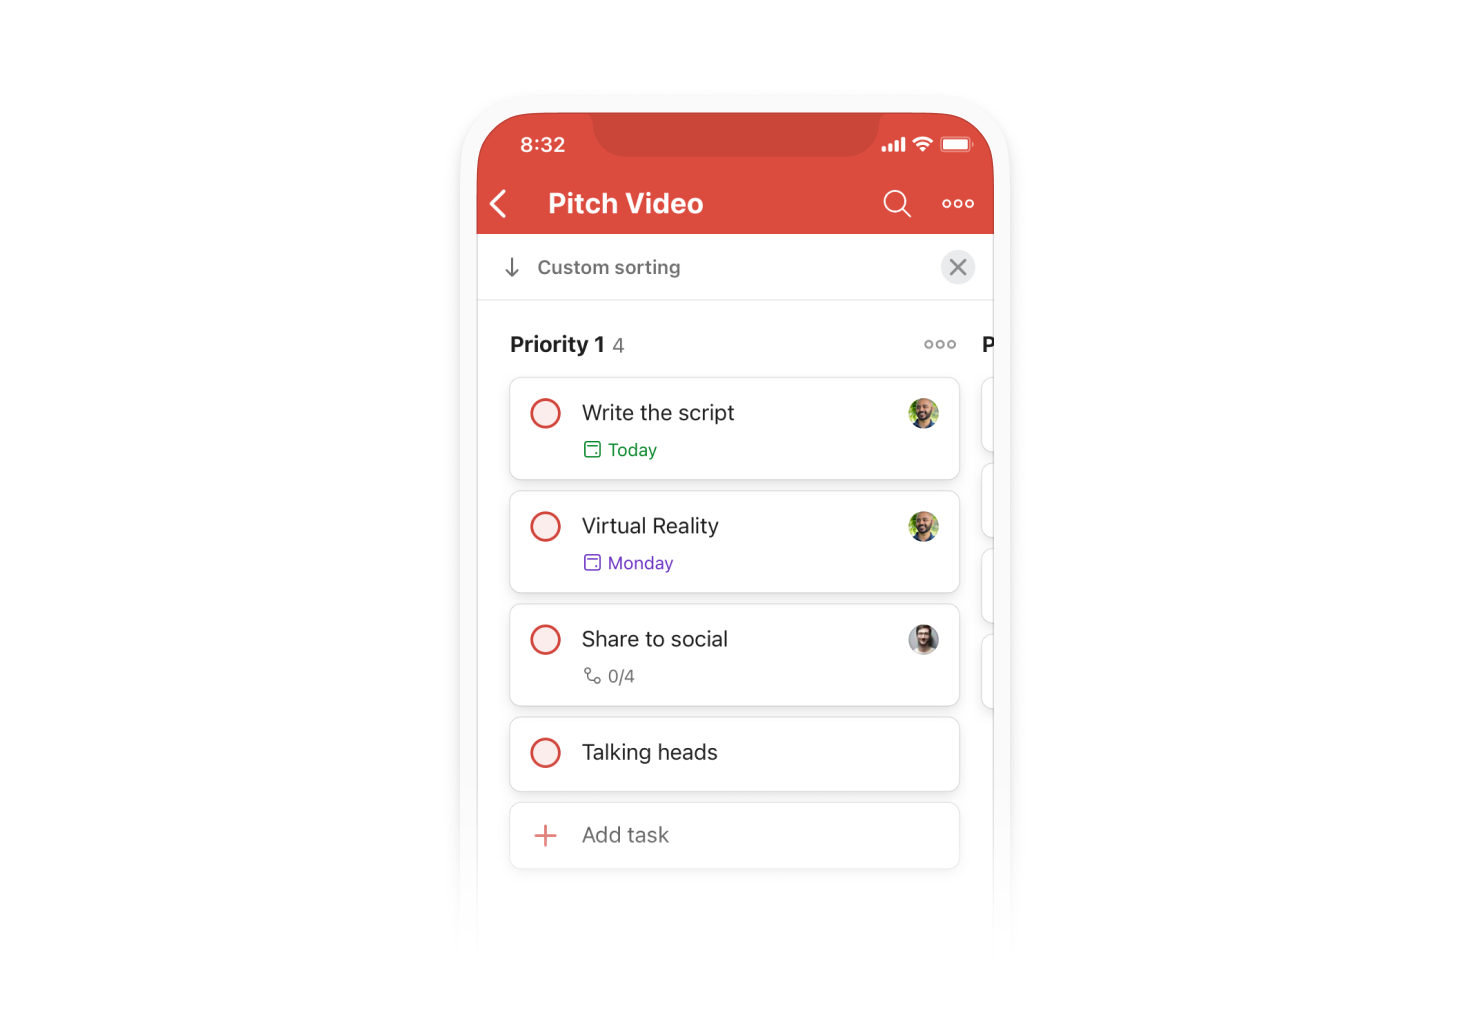 Todoist sorting Show same view as above on mobile